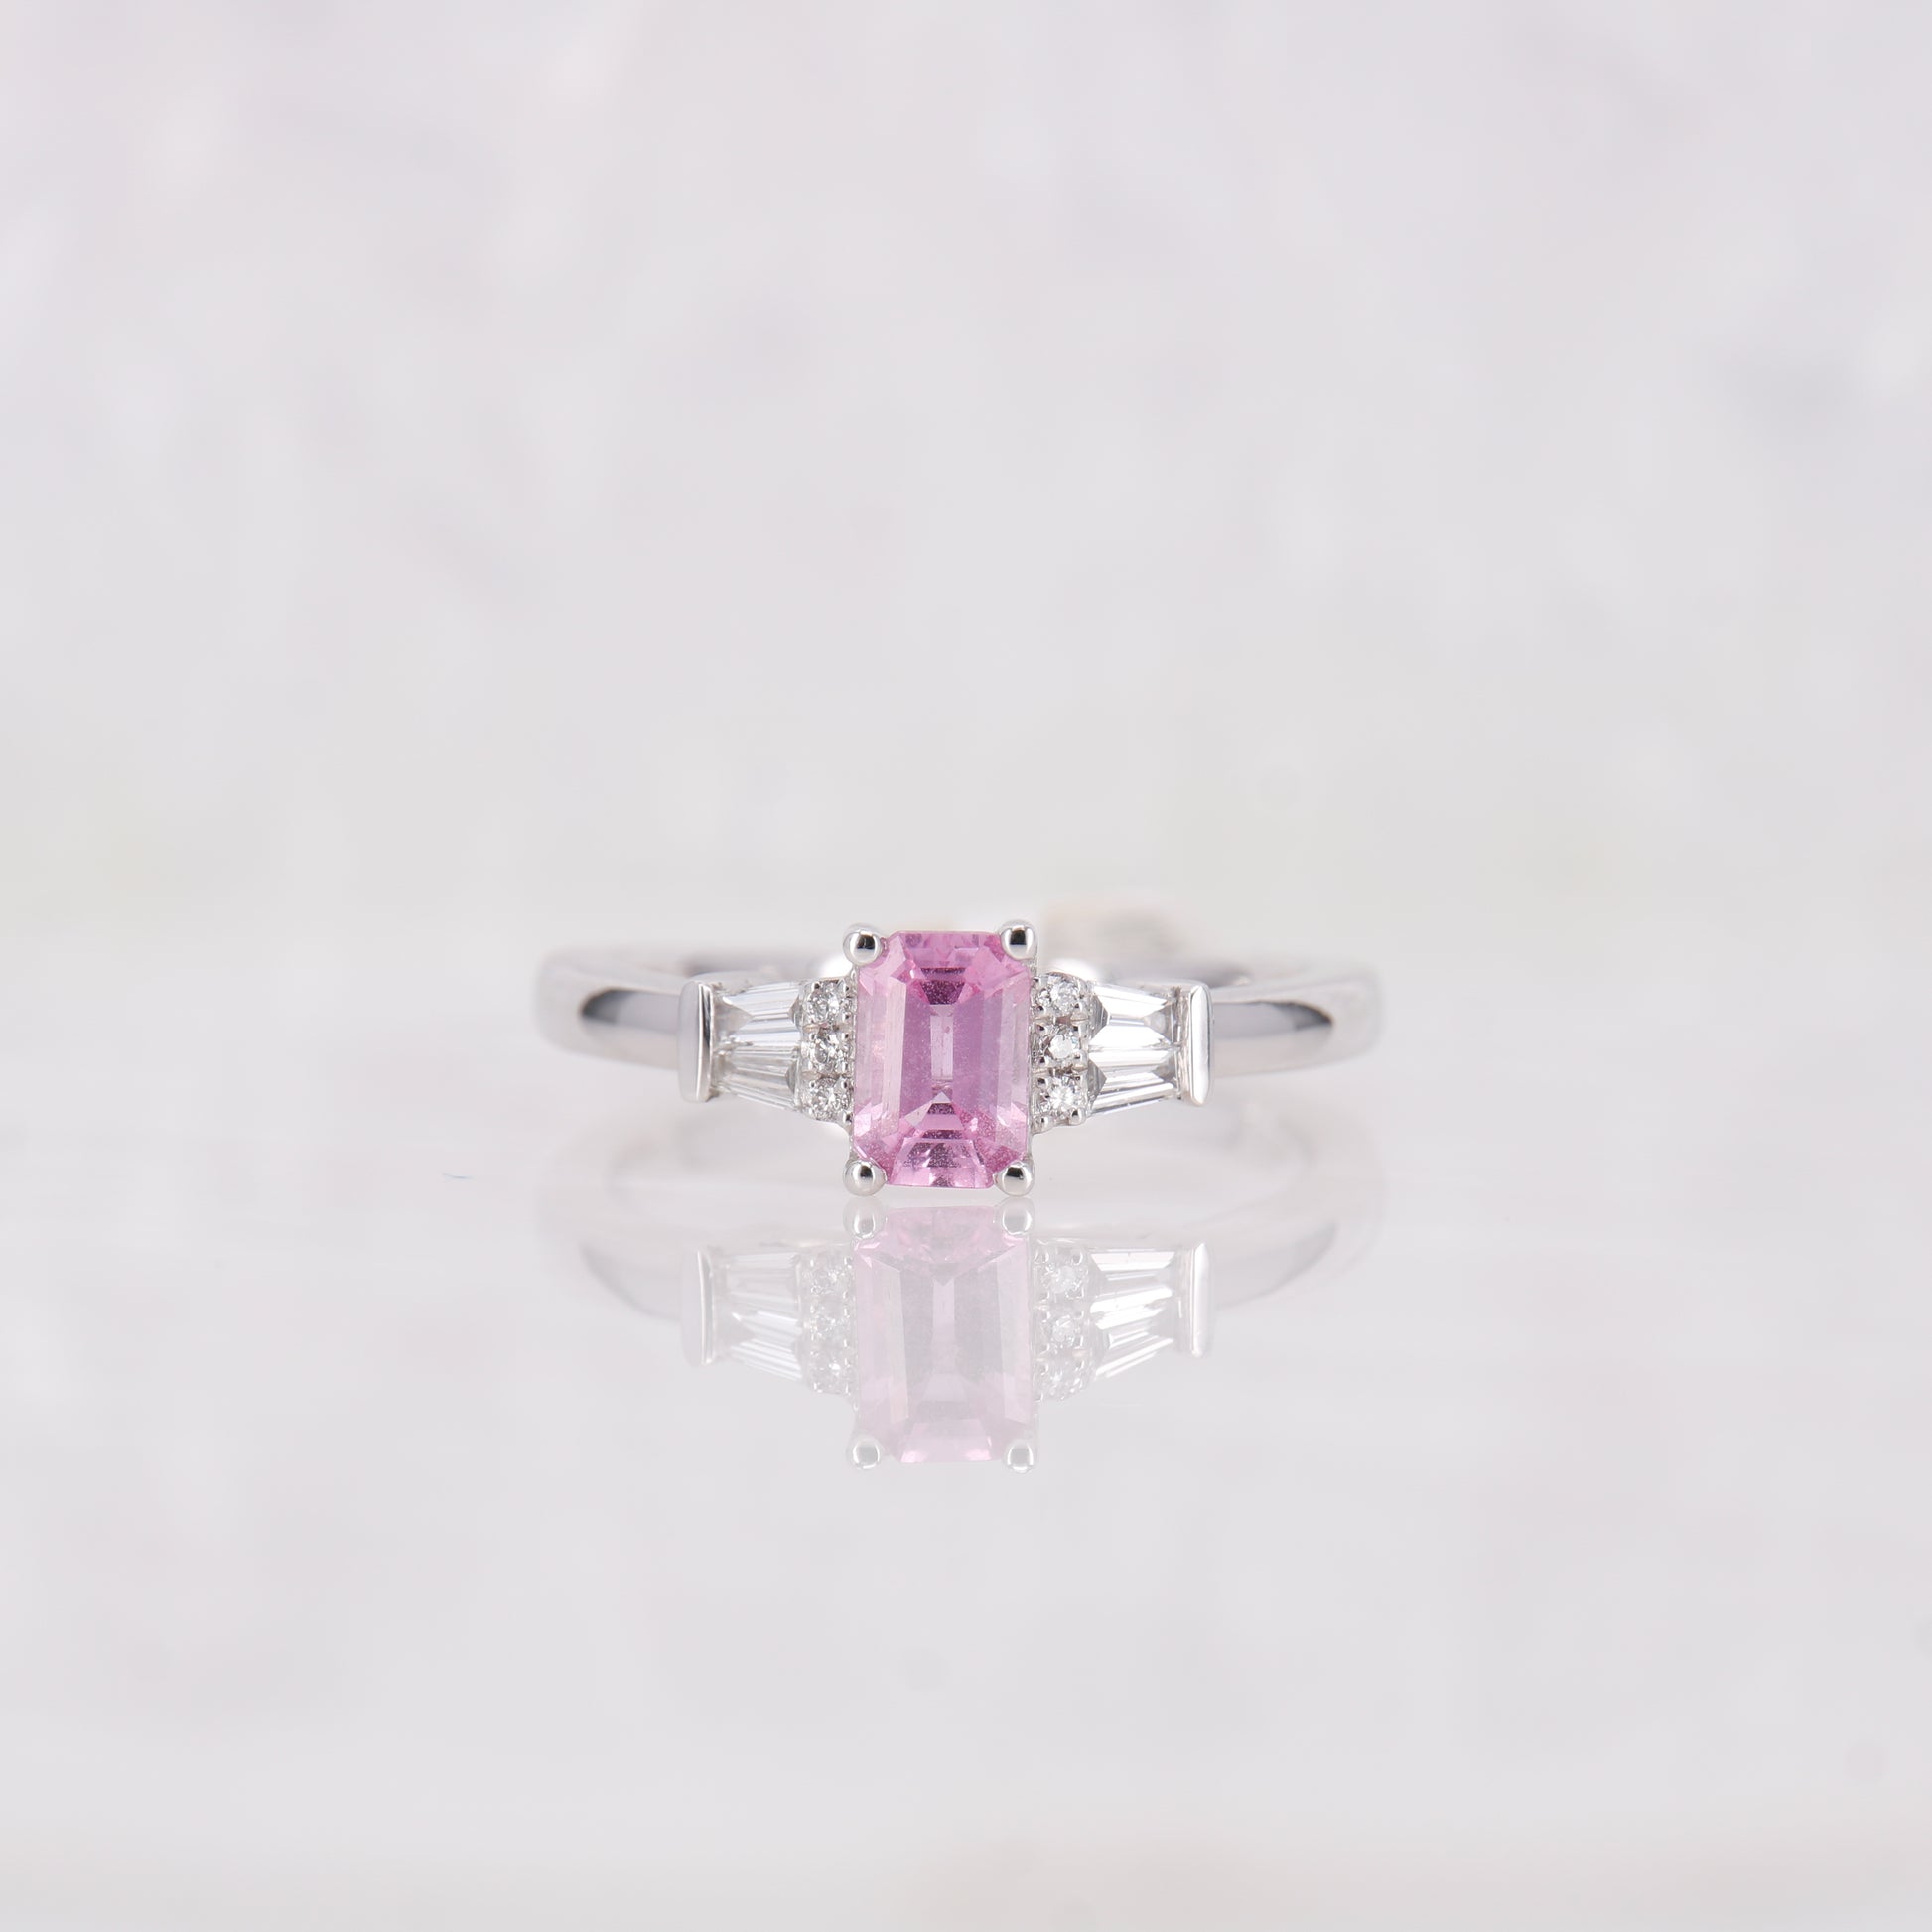 Pink Sapphire and Diamond Ring set in Platinum. Tapered baguette side stones.